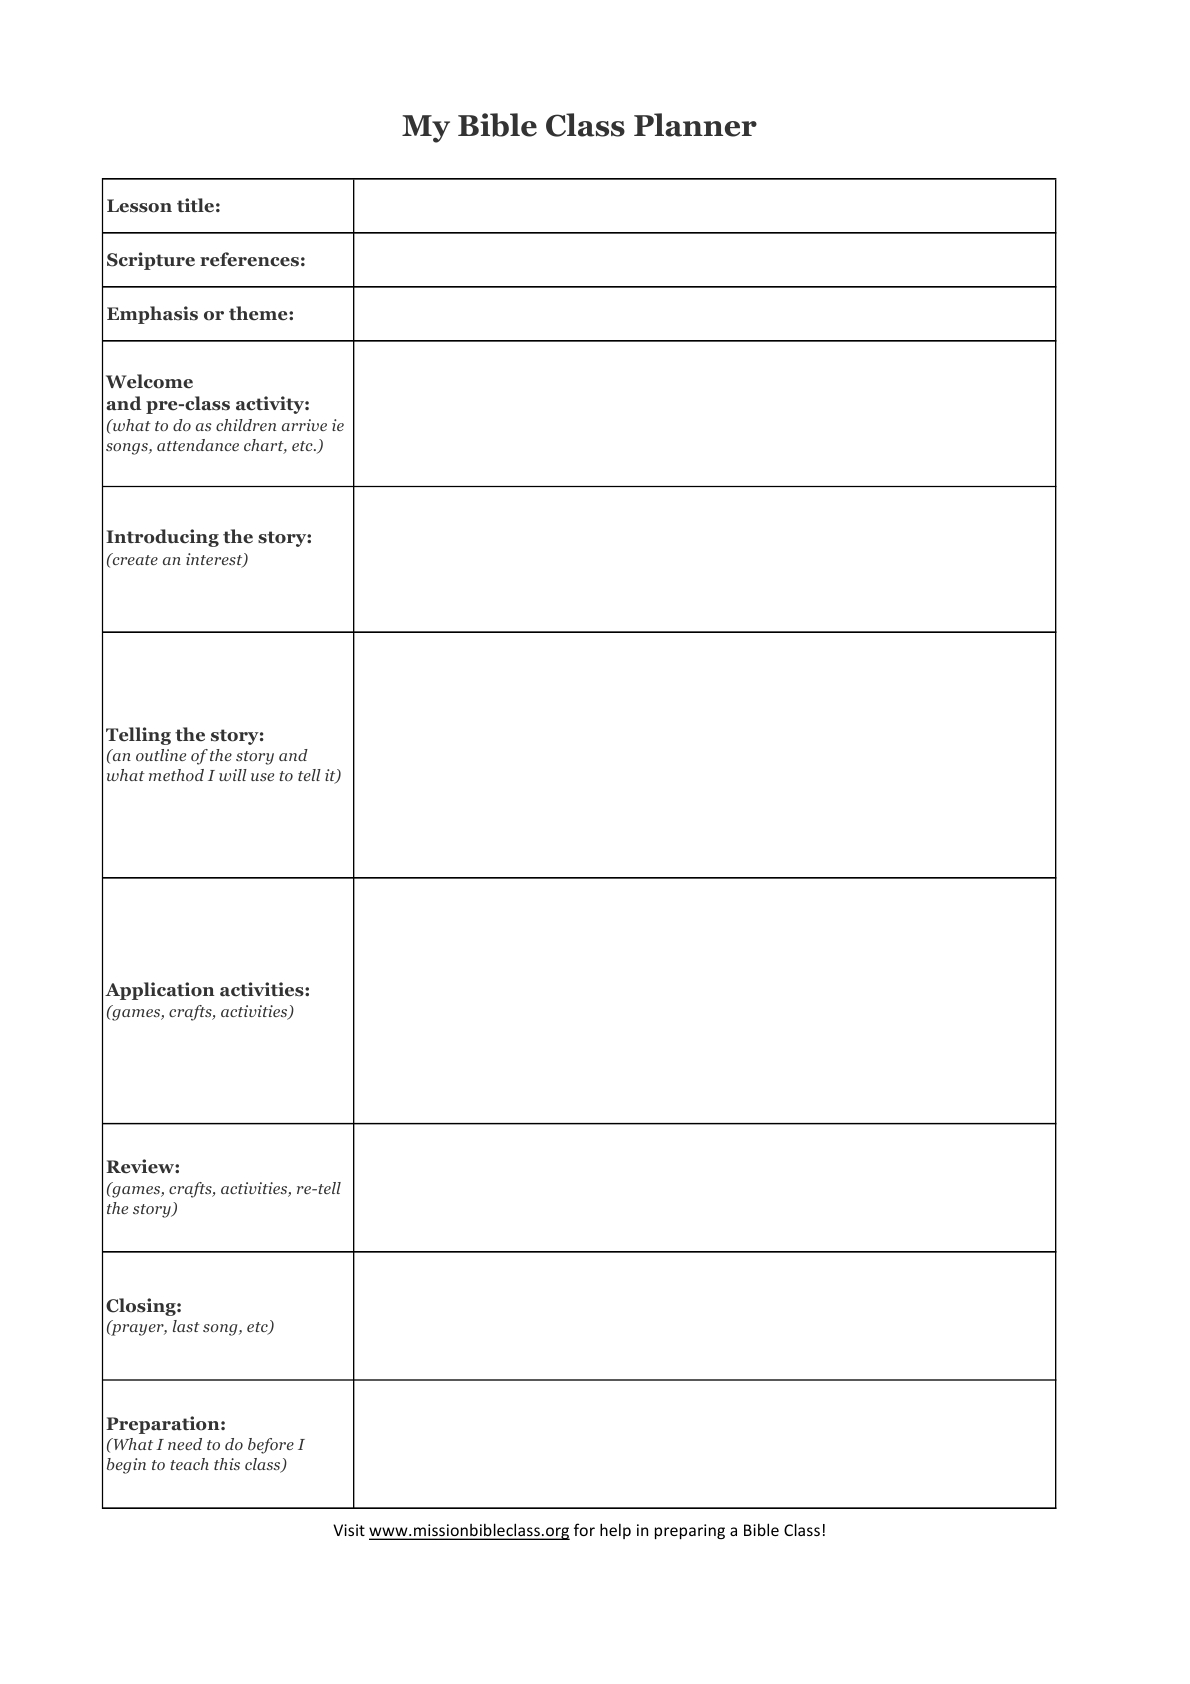 Blank Lesson Plan Templates To Print | Lesson Planning | Blank with Template Printable For Monthly Calendar Lesson Plans For Childrens Church